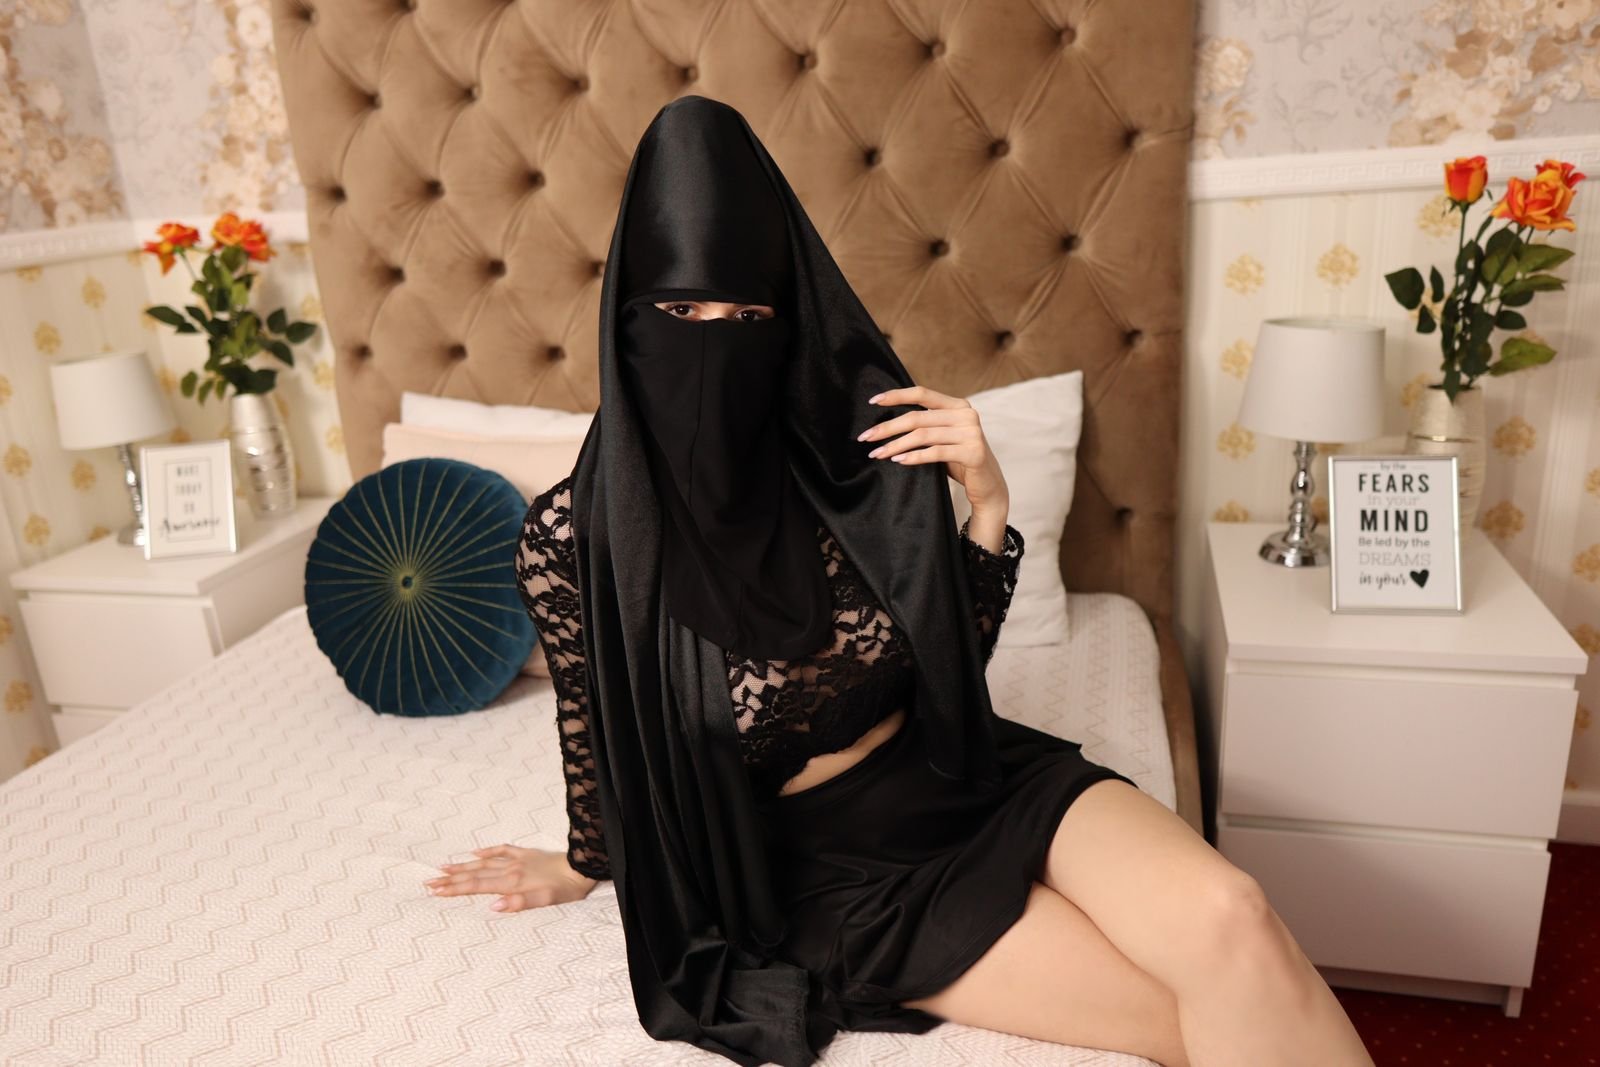 Skype live sex chat with Nora Suad